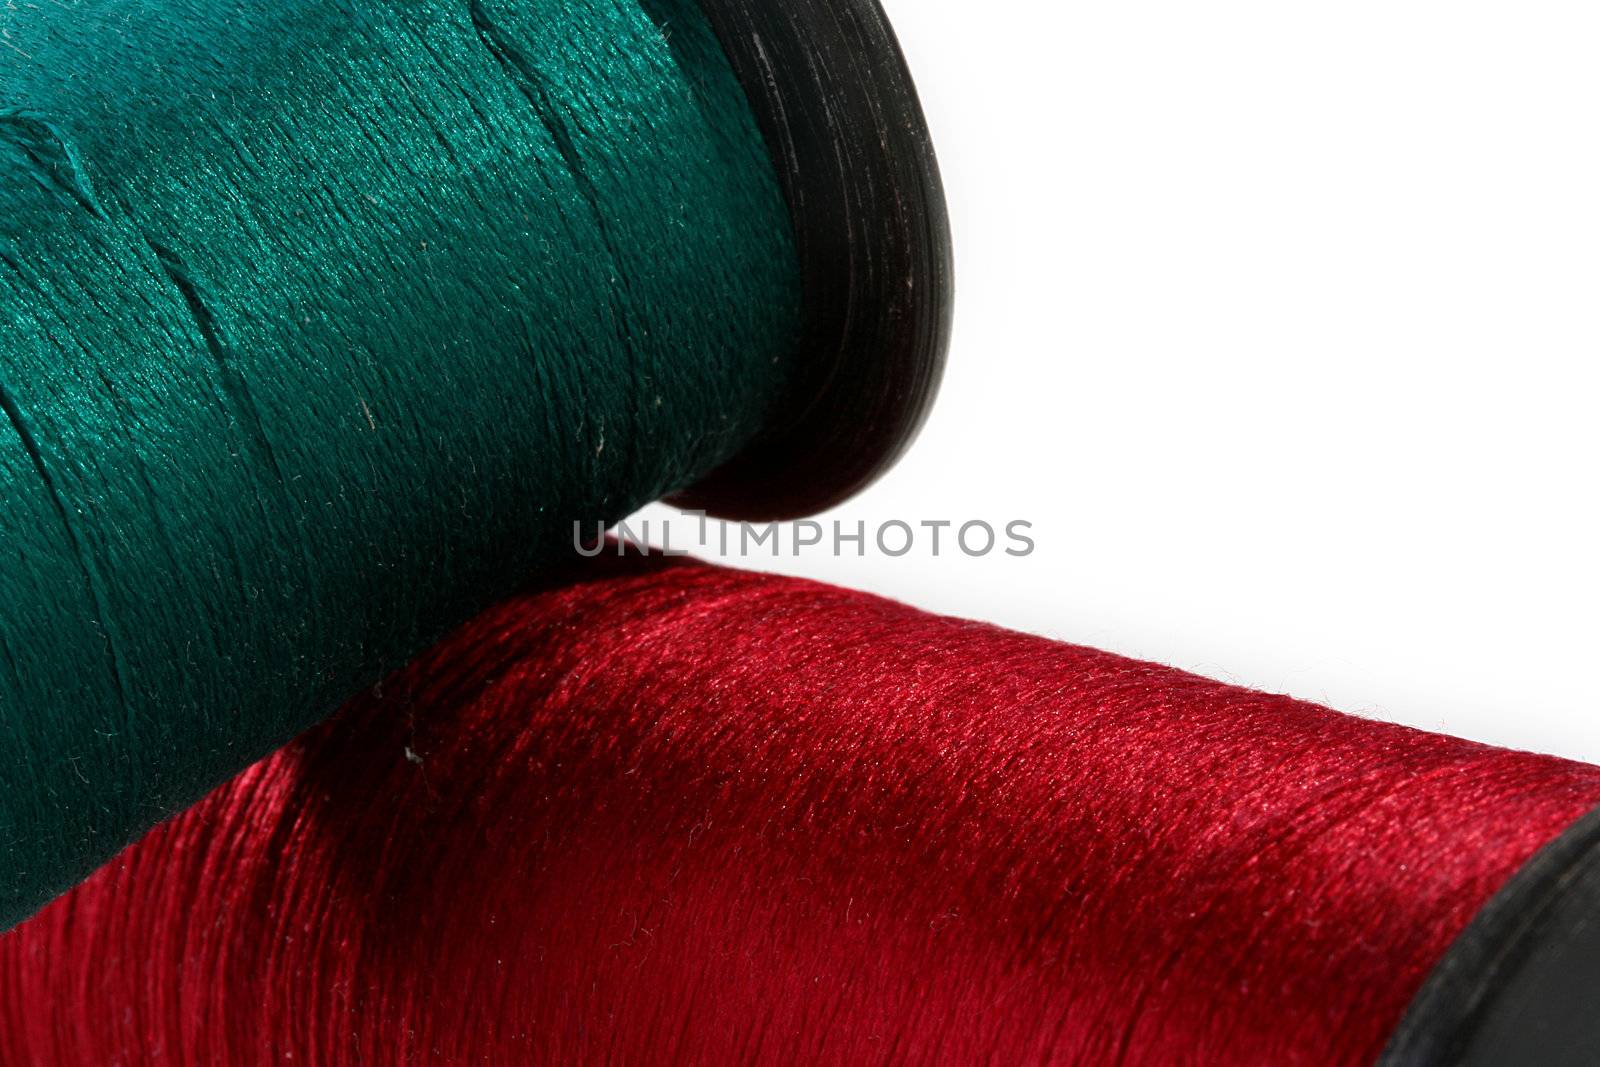 Threads for sewing on coils darkly green and darkly red.